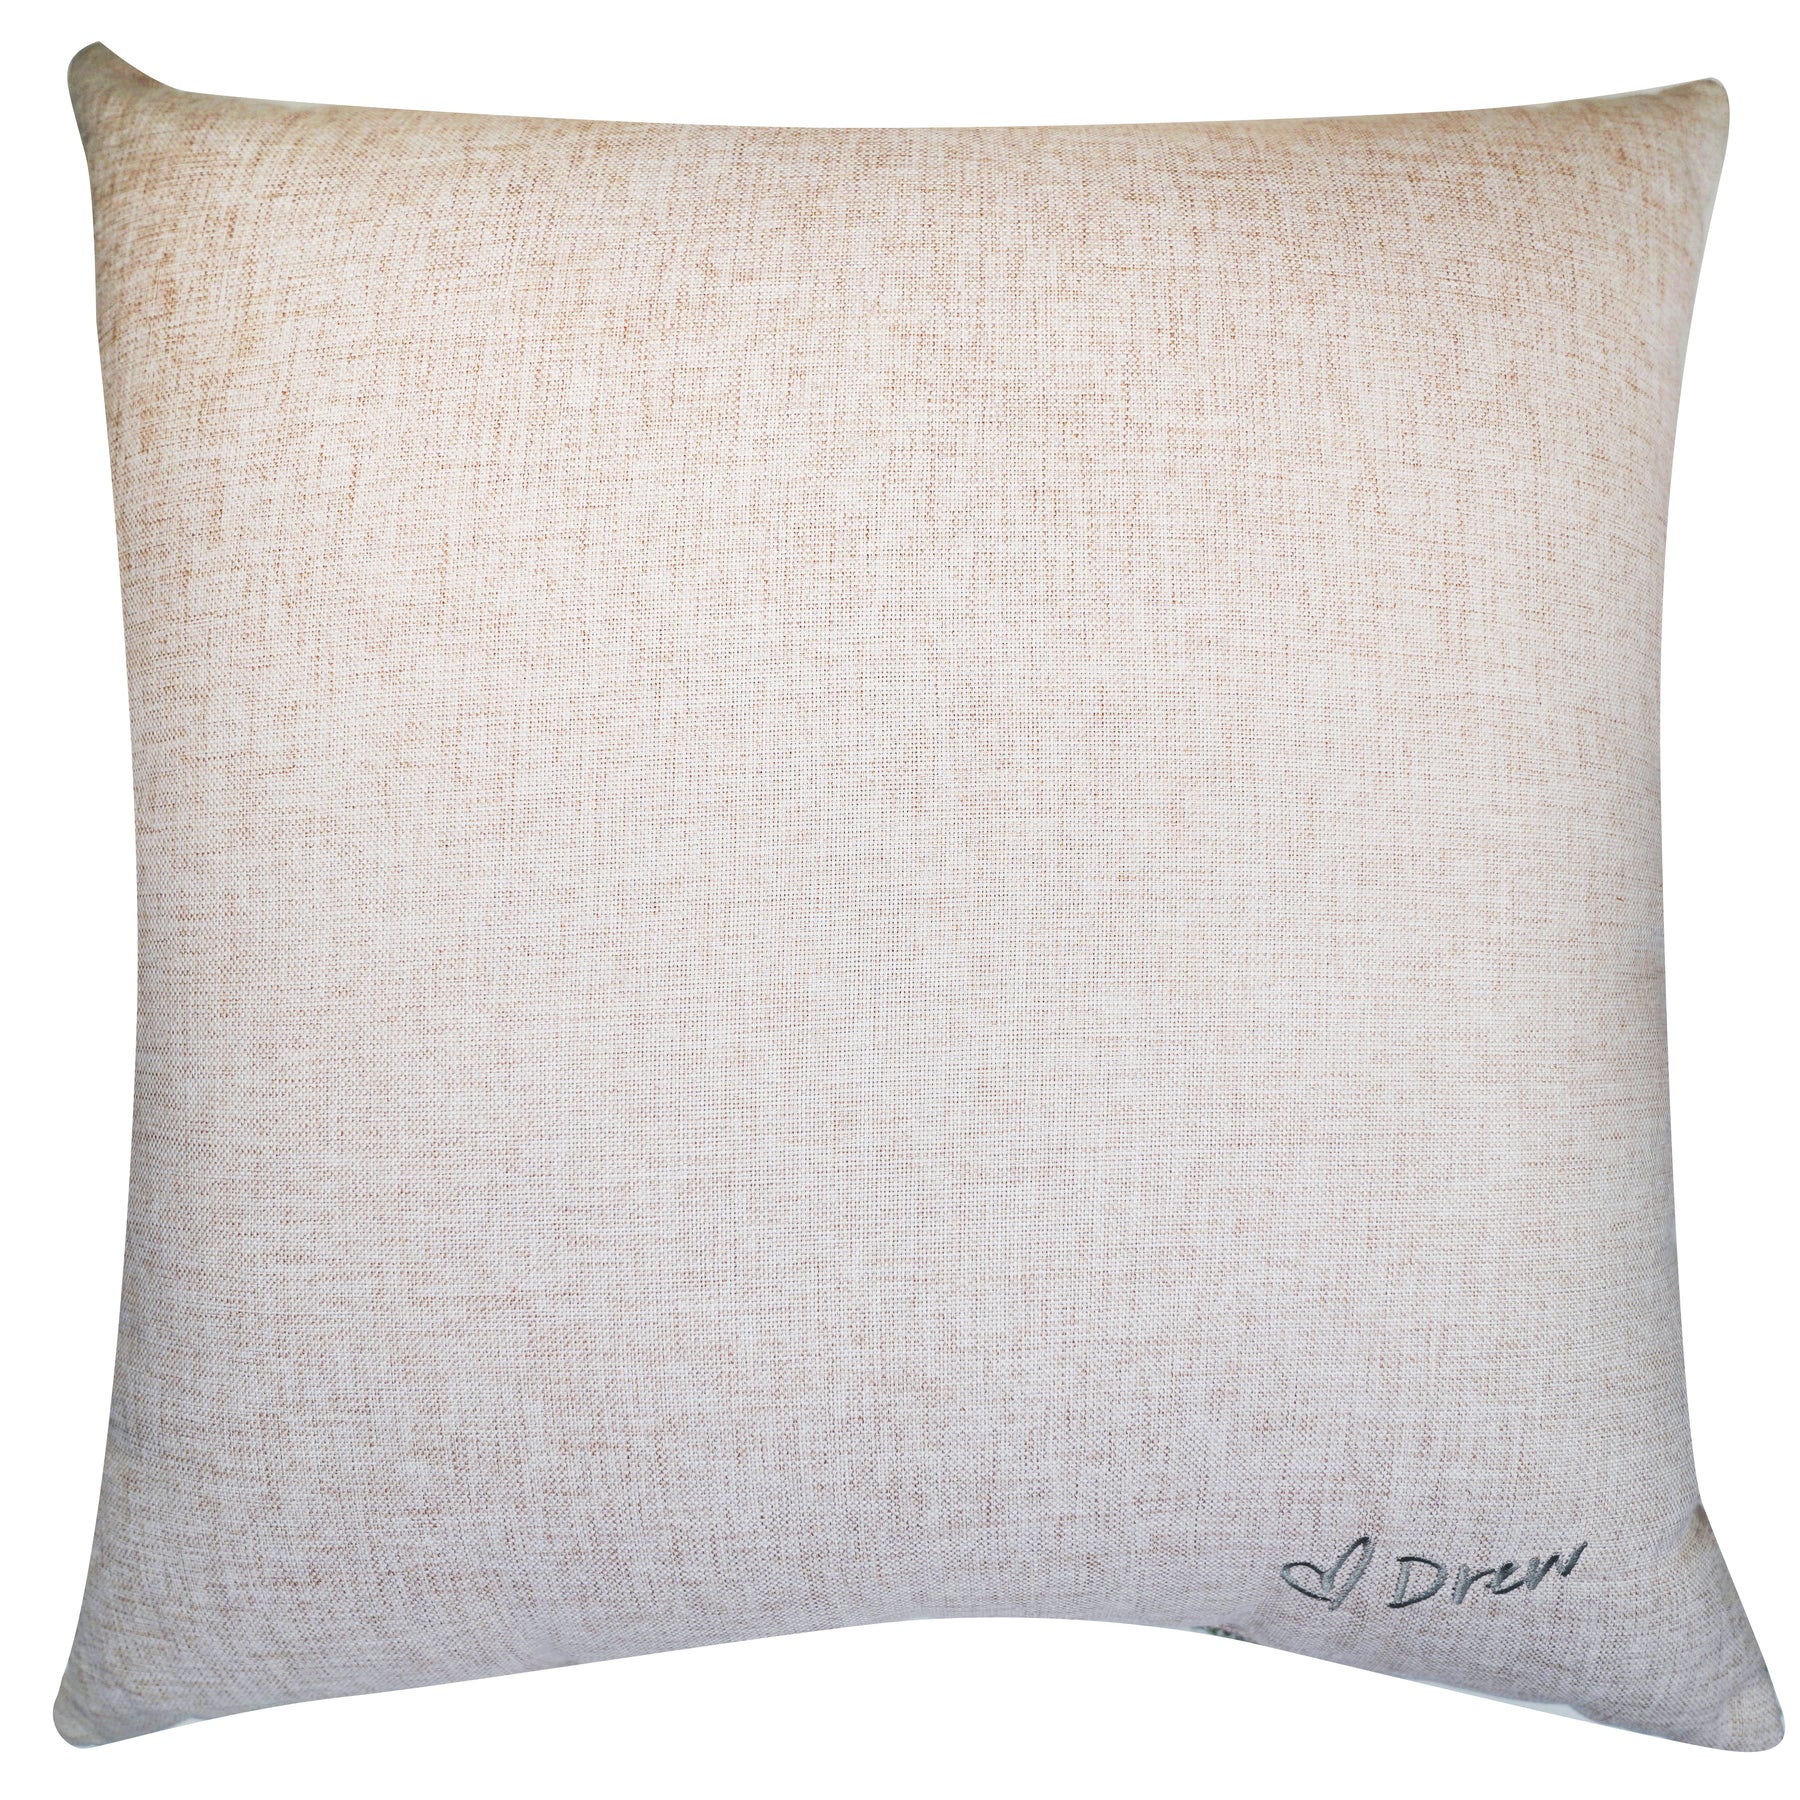 Beautiful Decorative Boucle Pillow, Sage Green, 20 x 20 inches, by Drew  Barrymore 